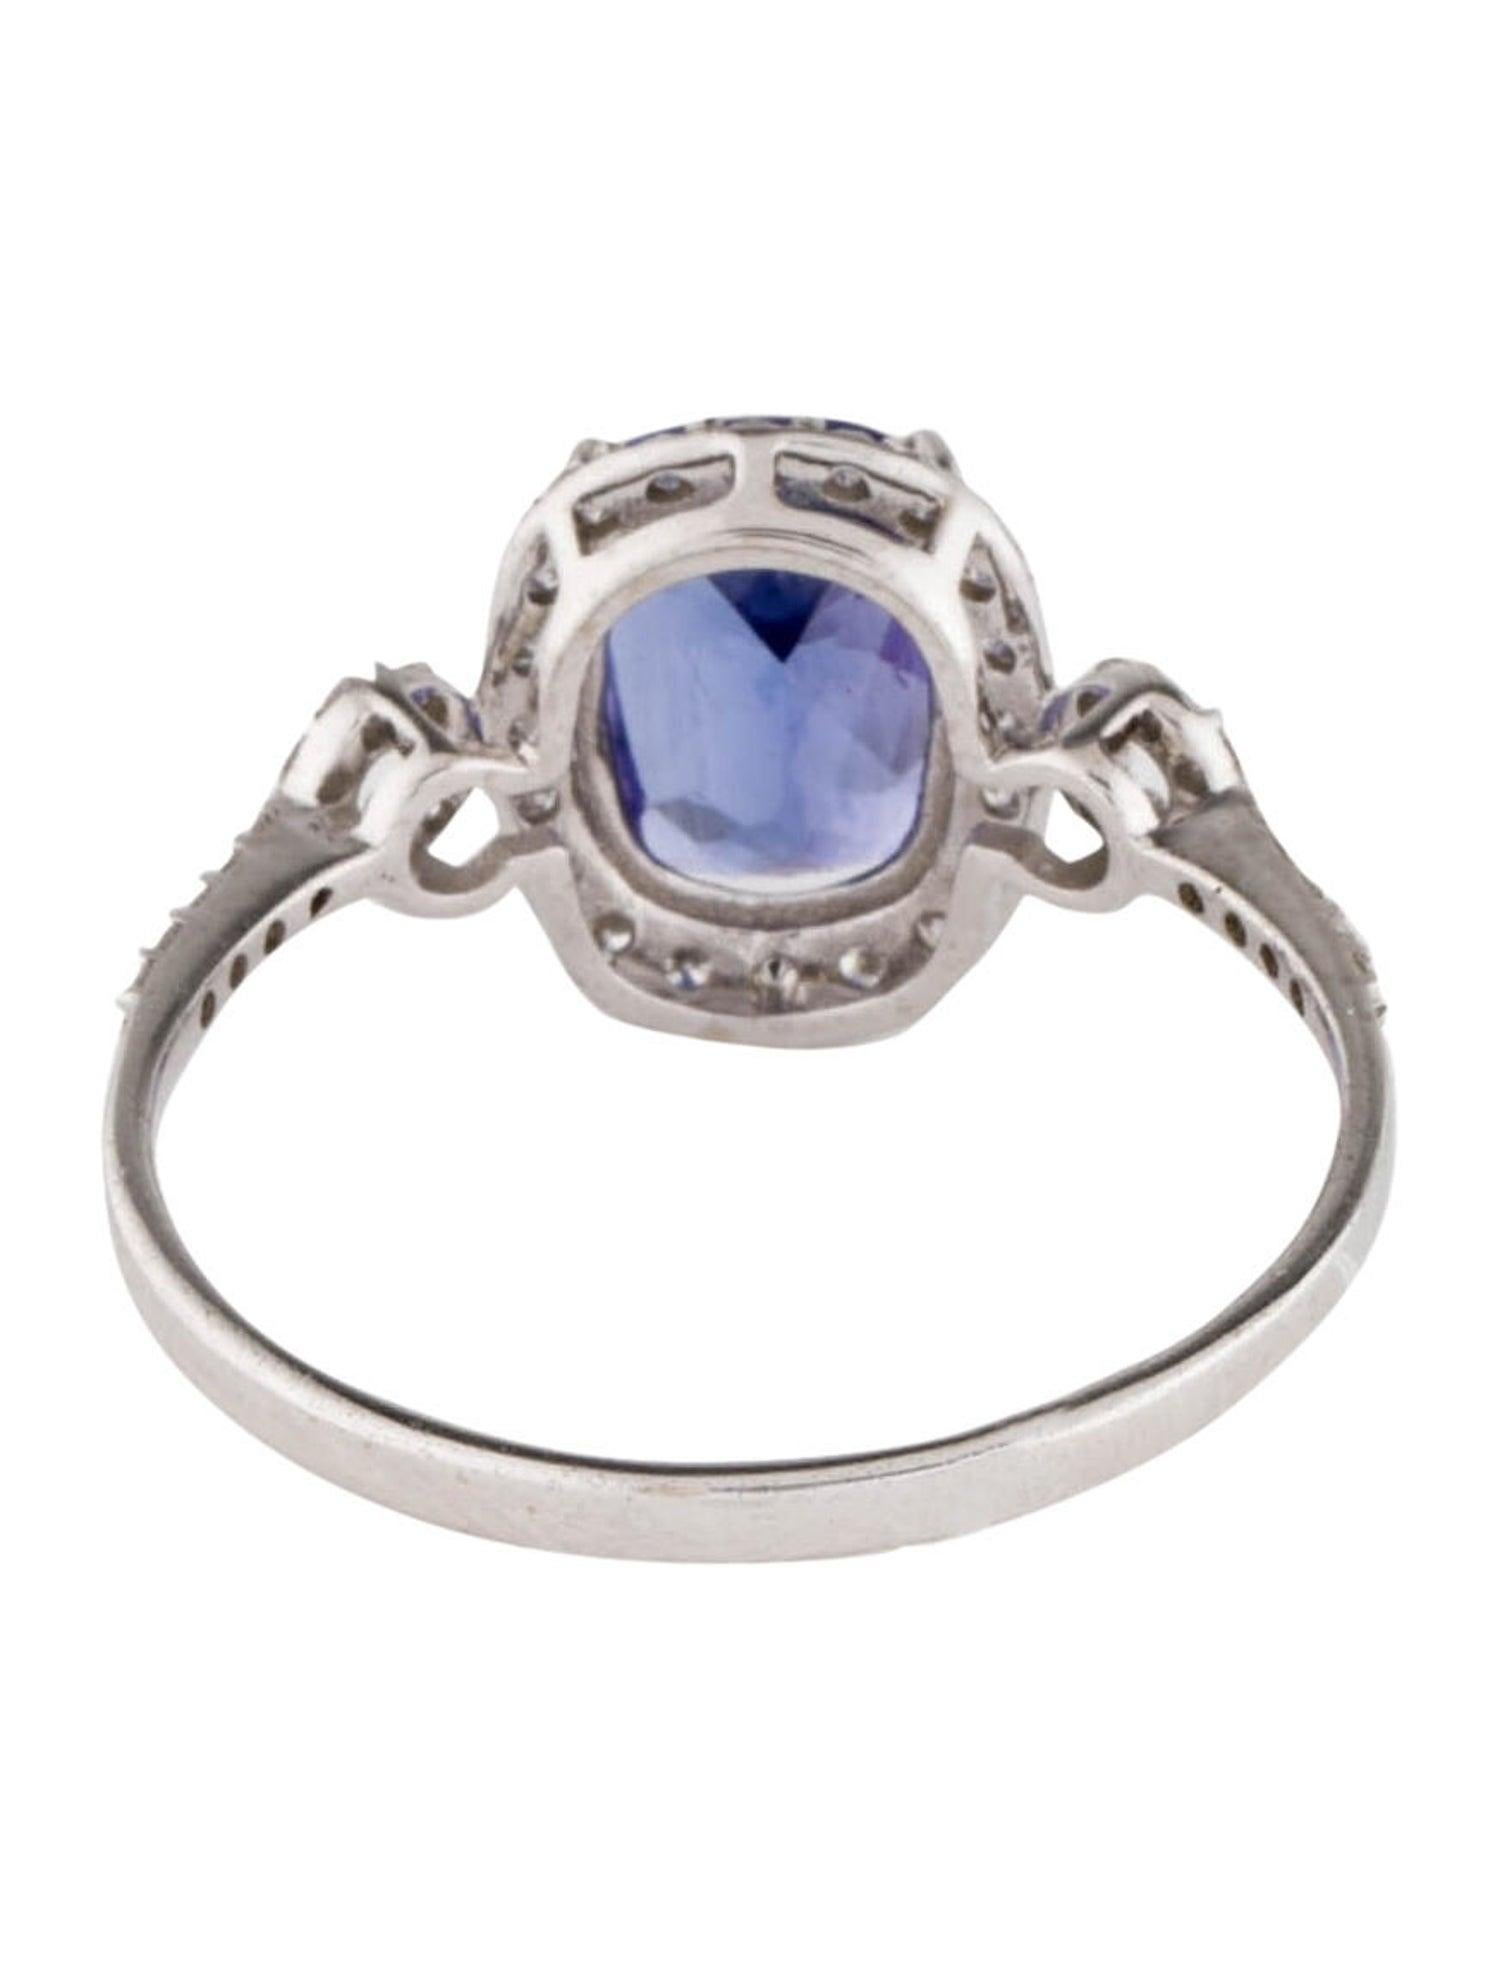 Stunning 14K Tanzanite & Diamond Cocktail Ring 1.70ctw, Size 7 - Elegant Jewelry In New Condition For Sale In Holtsville, NY